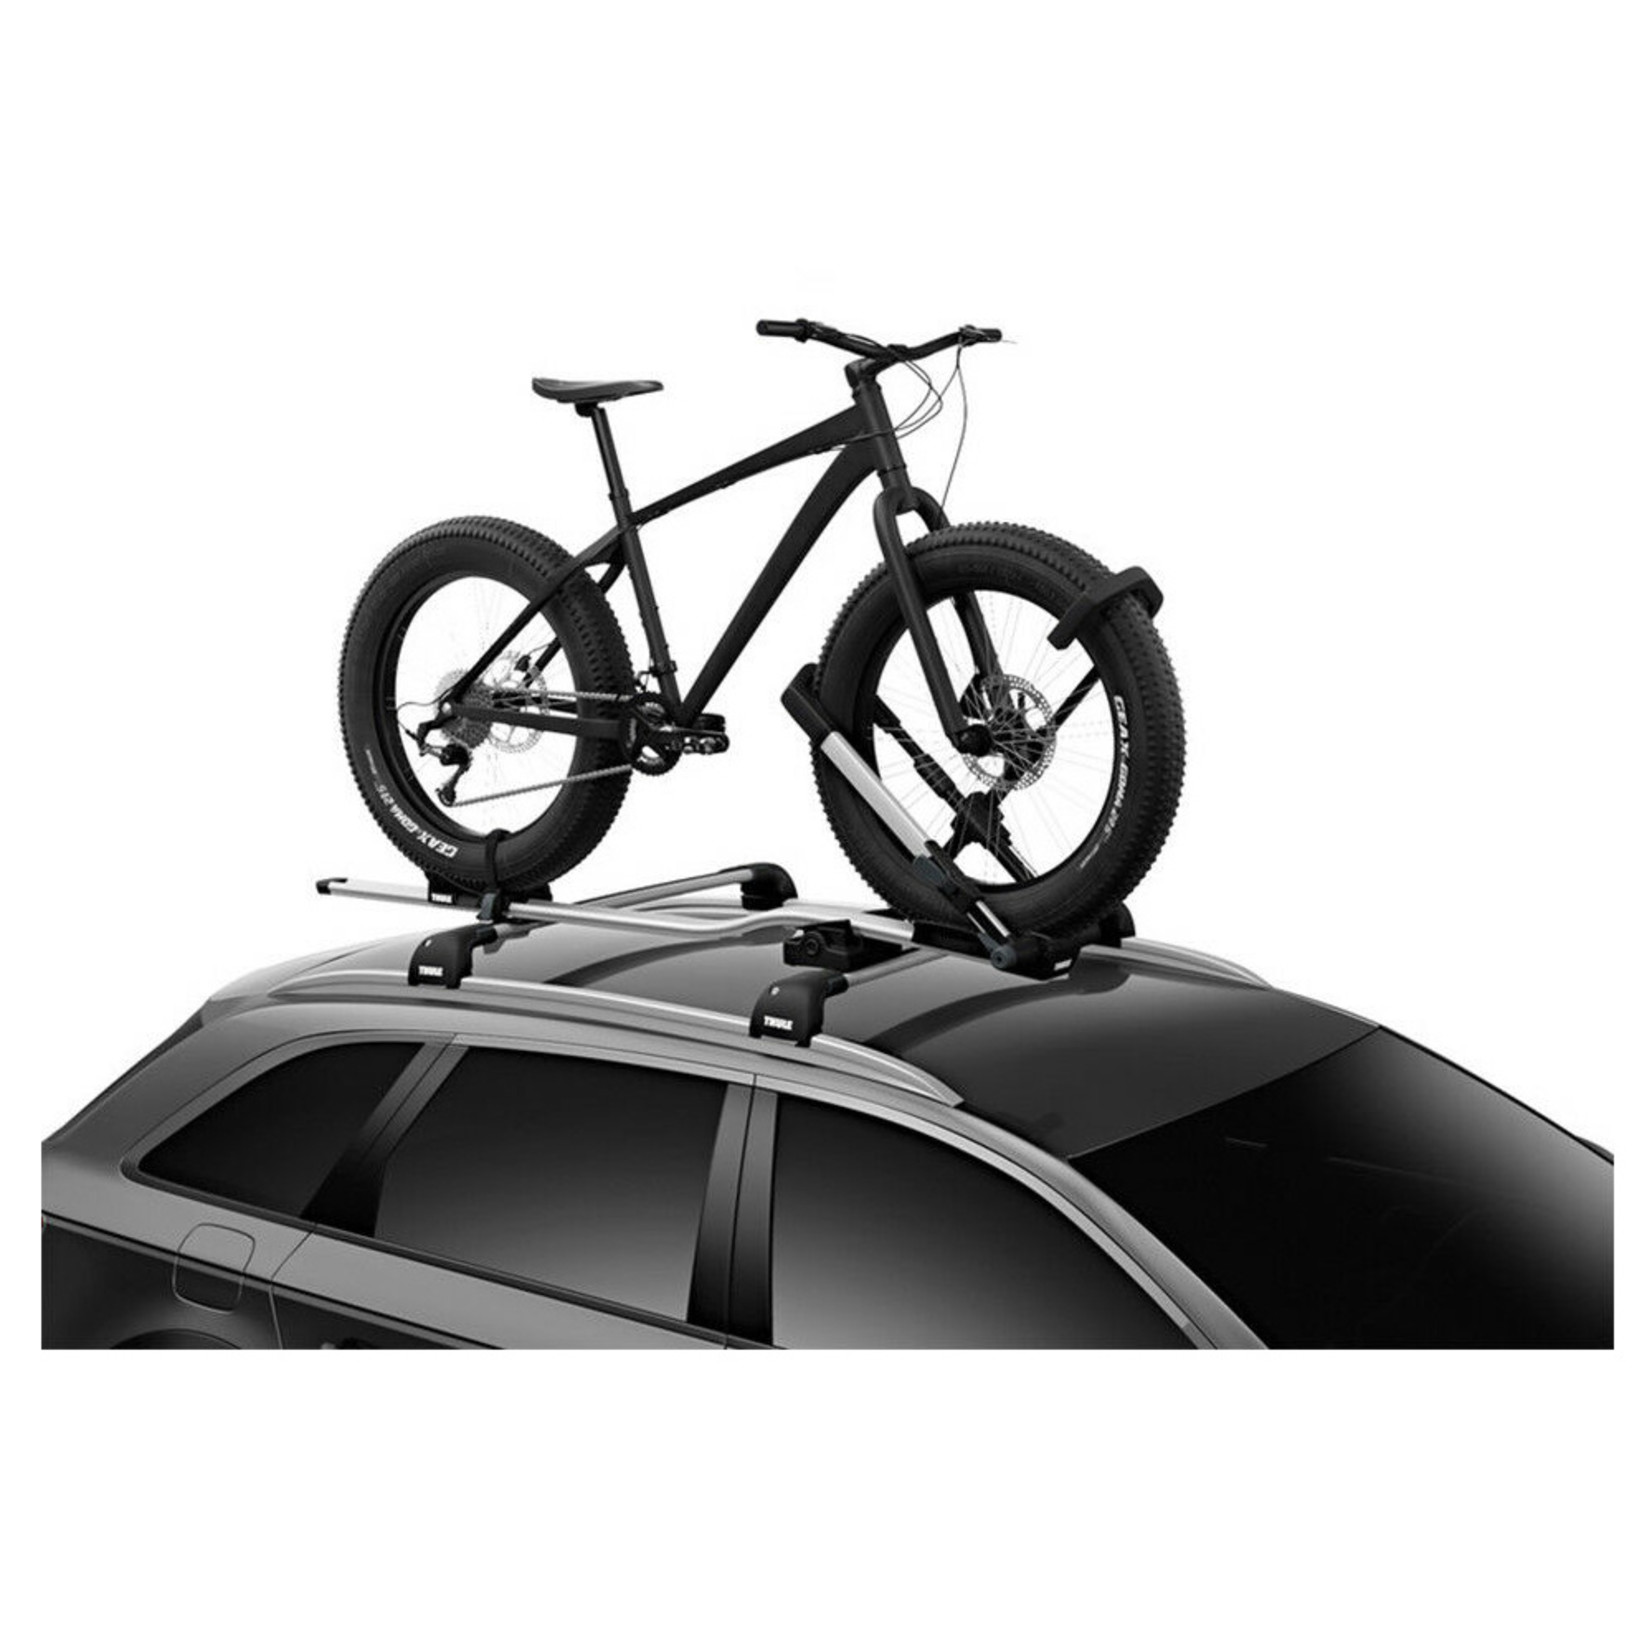 Thule Thule Upride Fatbike Adapter 599100 - Black With Replacement Wheel Holder